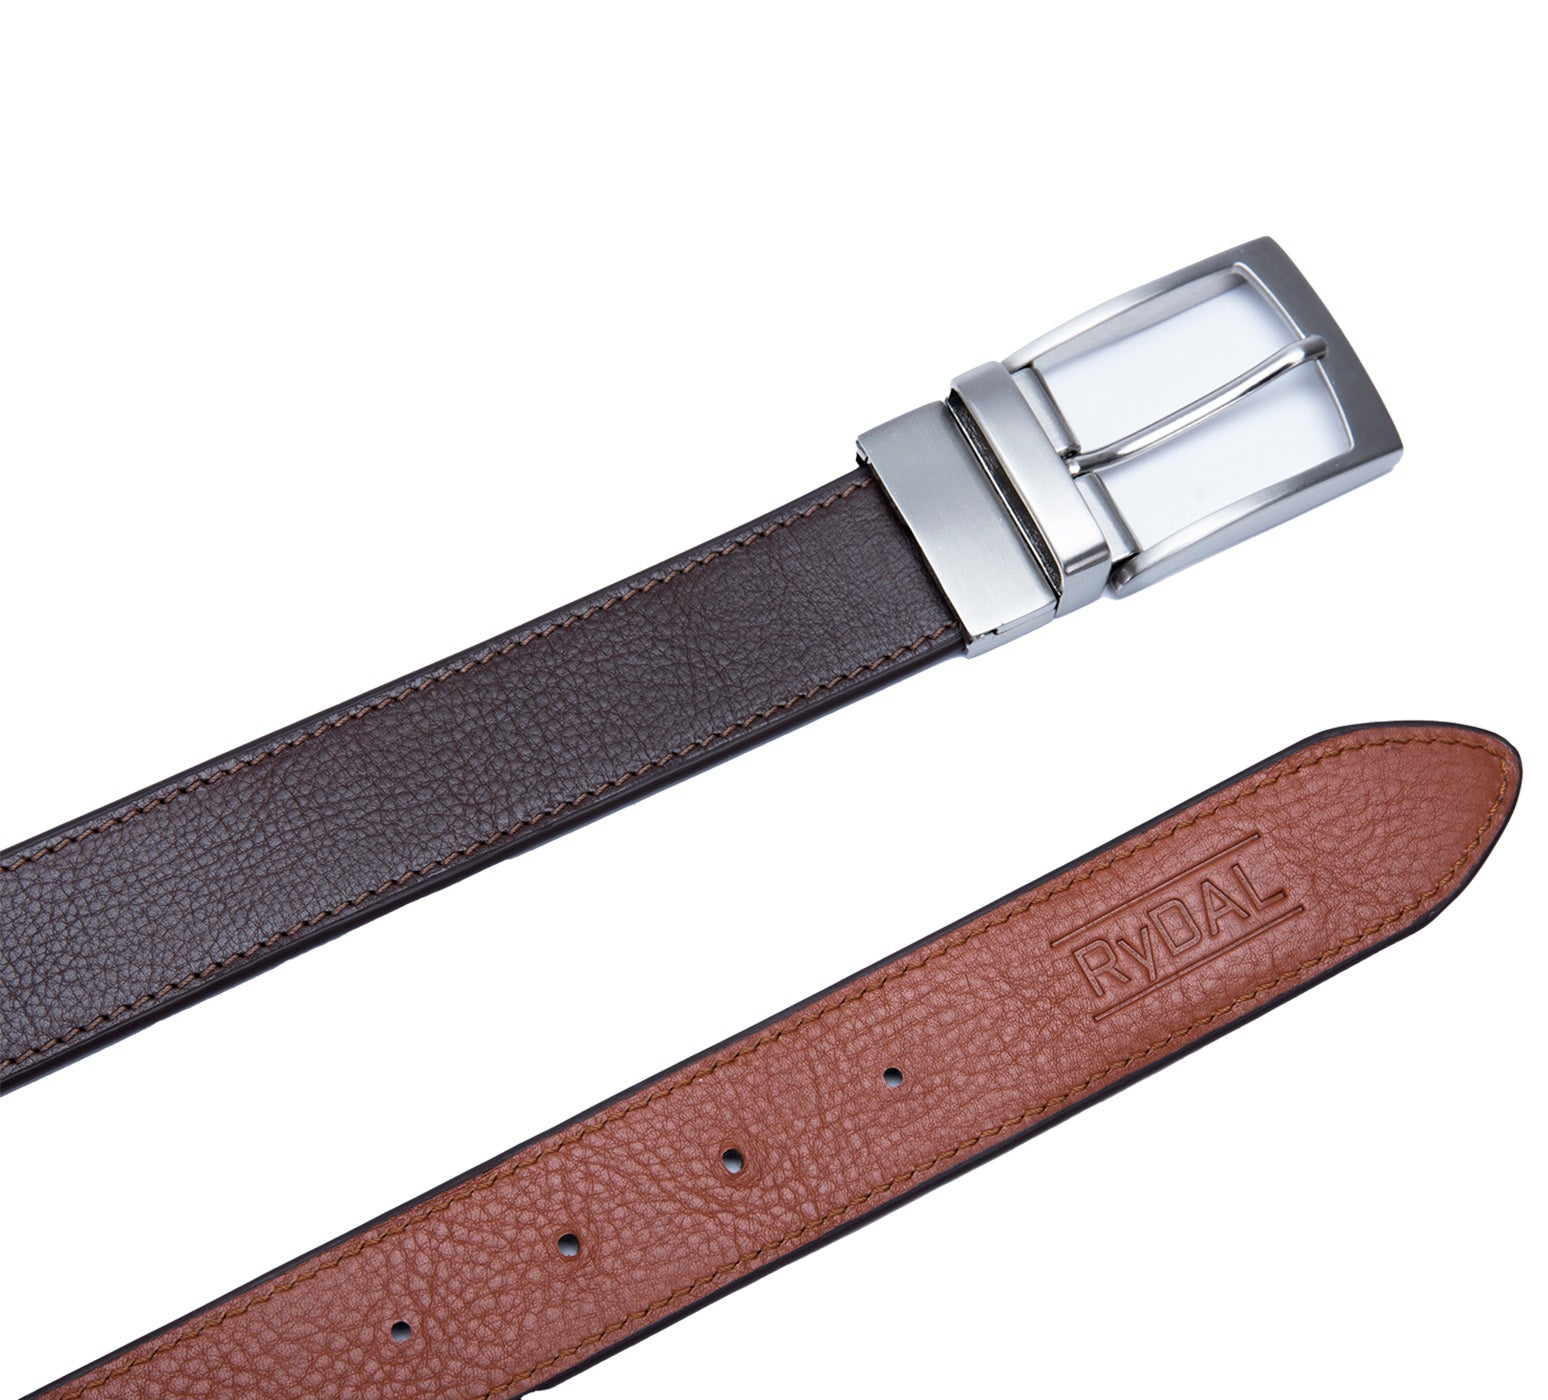 Firenze Mens Reversible Leather Belt from Rydal in 'Dark Brown/Rust' showing both sides.